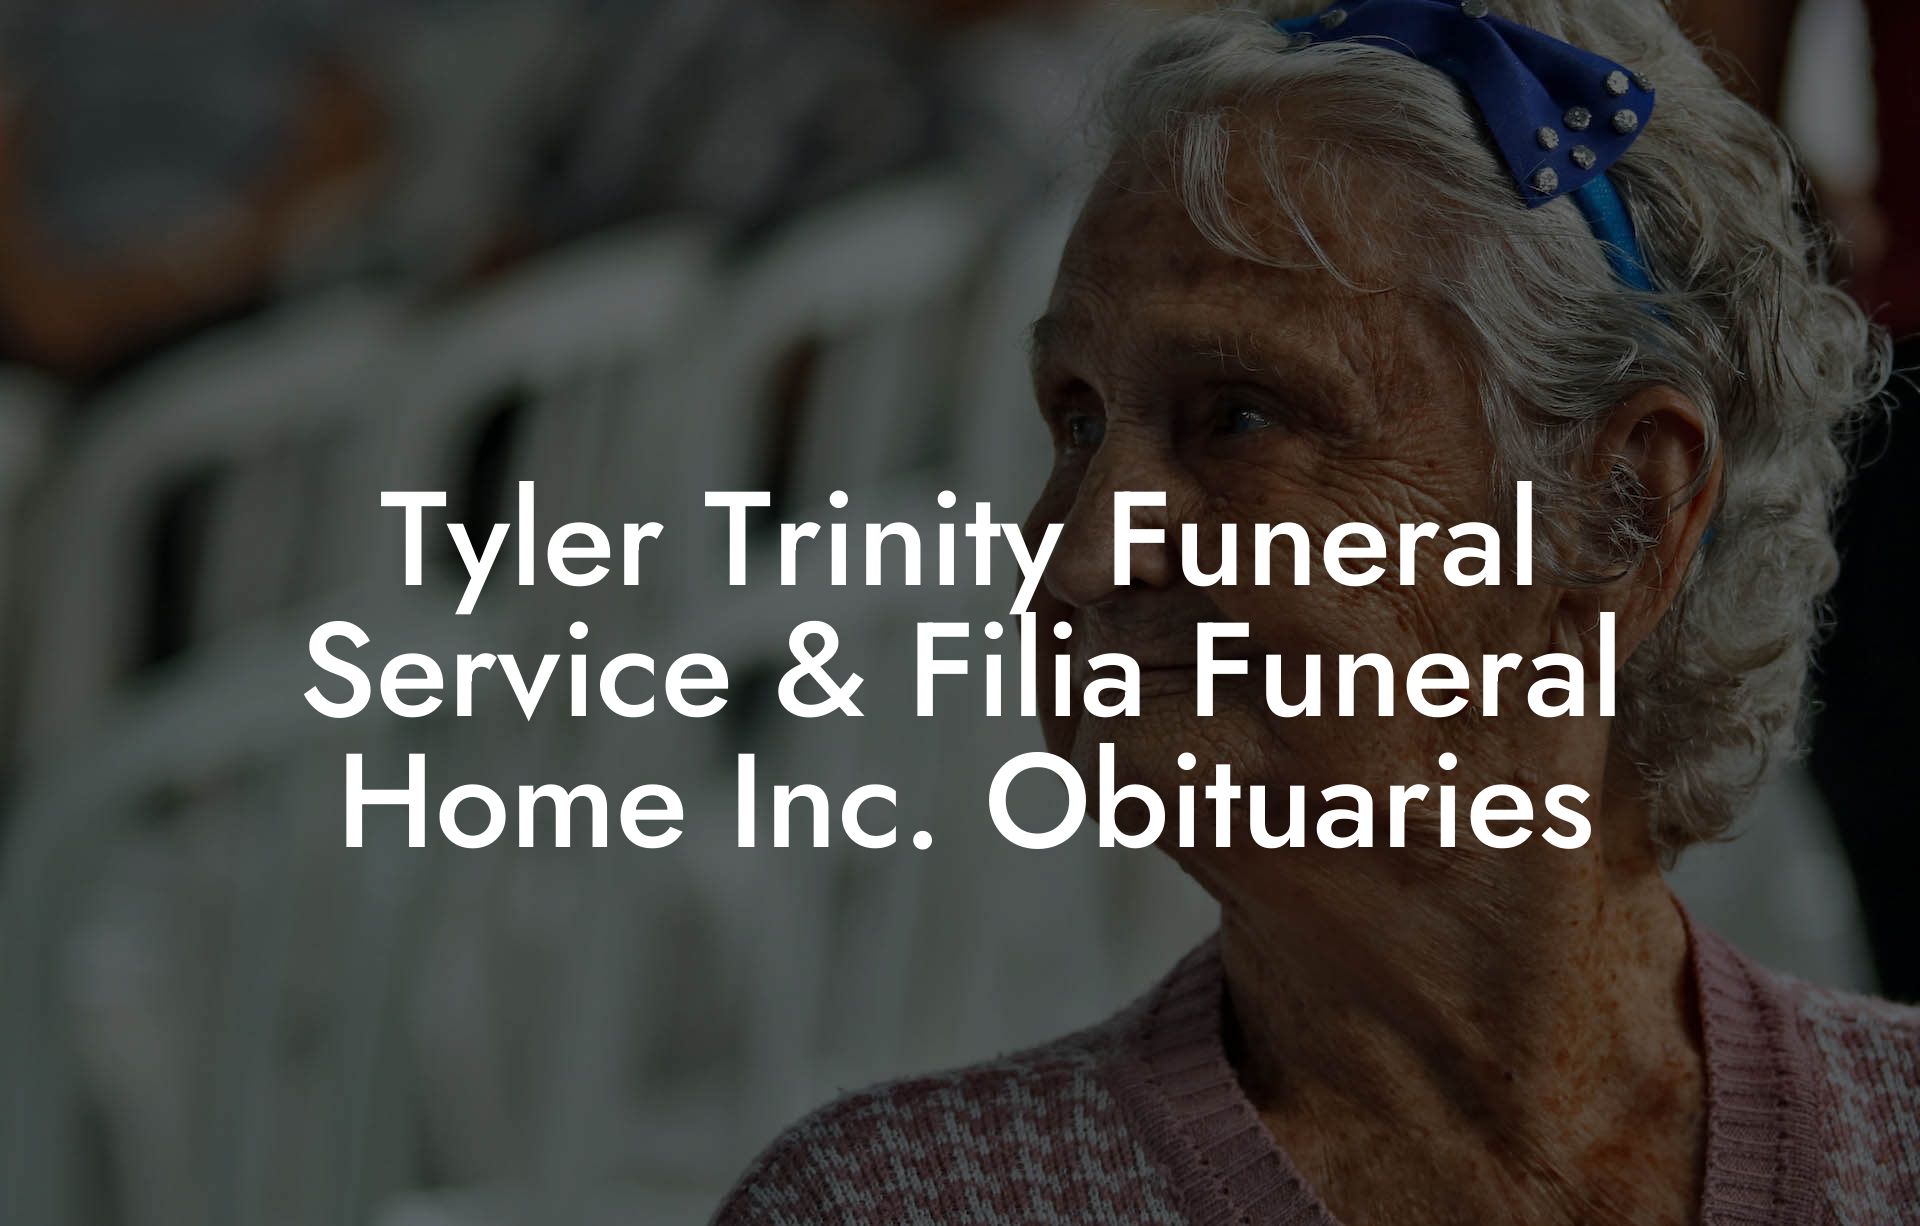 Tyler Trinity Funeral Service & Filia Funeral Home Inc. Obituaries